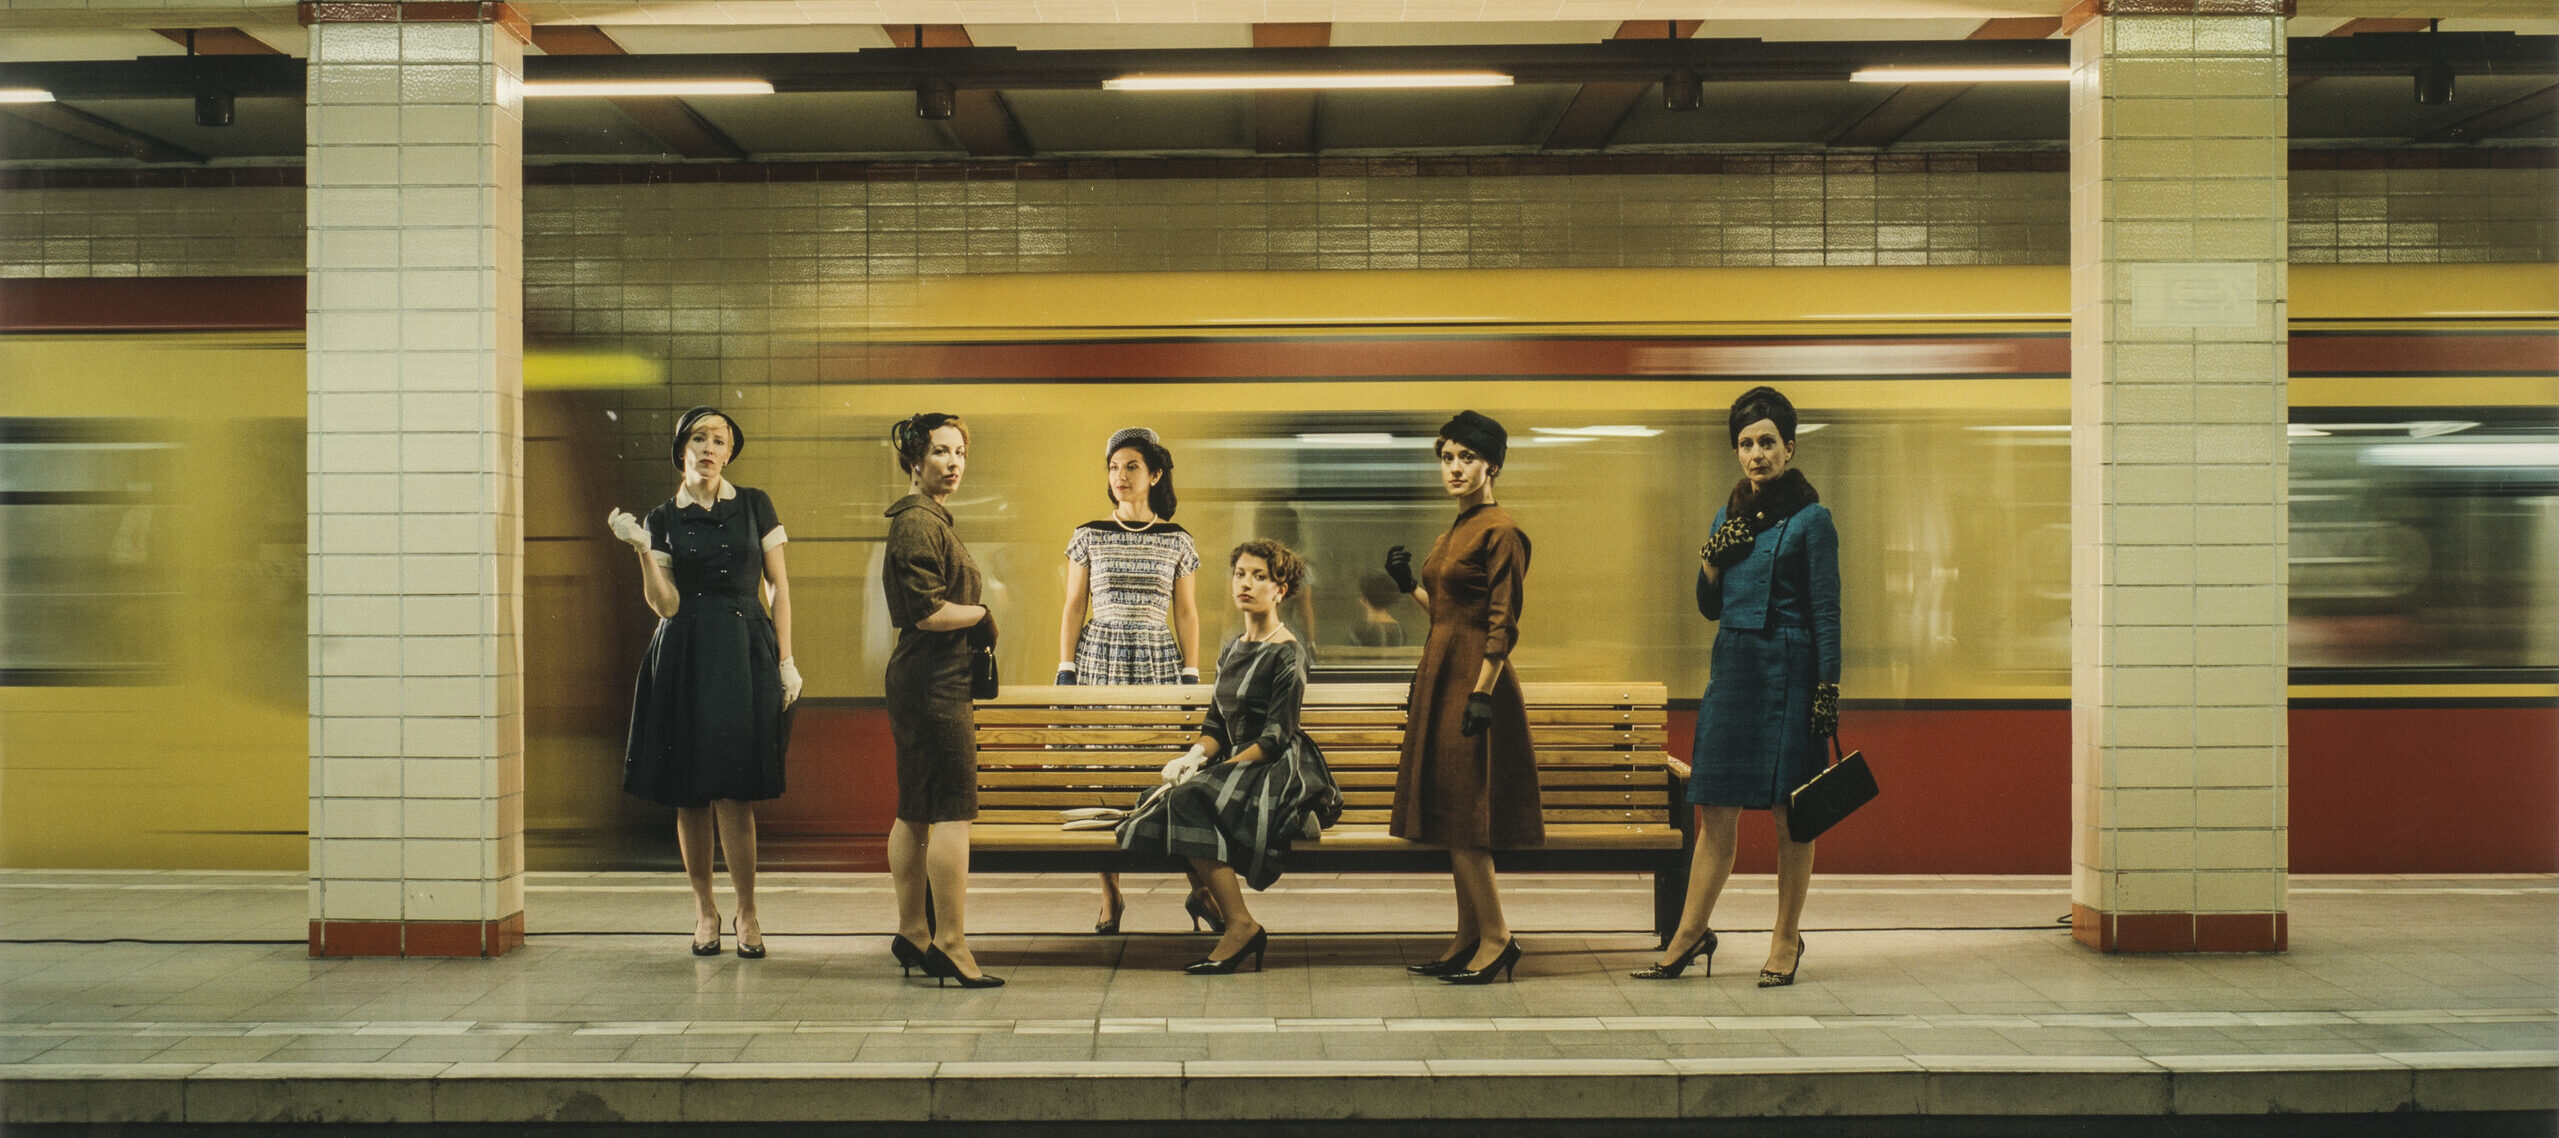 Eve Sussman, <i>Women in S-Bahn</i> (Photographic still from <i>The Rape of the Sabine Women</i>), 2005; Chromogenic color print, 39 3/8 x 51 1/4 in.; National Museum of Women in the Arts, Gift of Heather and Tony Podesta Collection; Photo by Lee Stalsworth